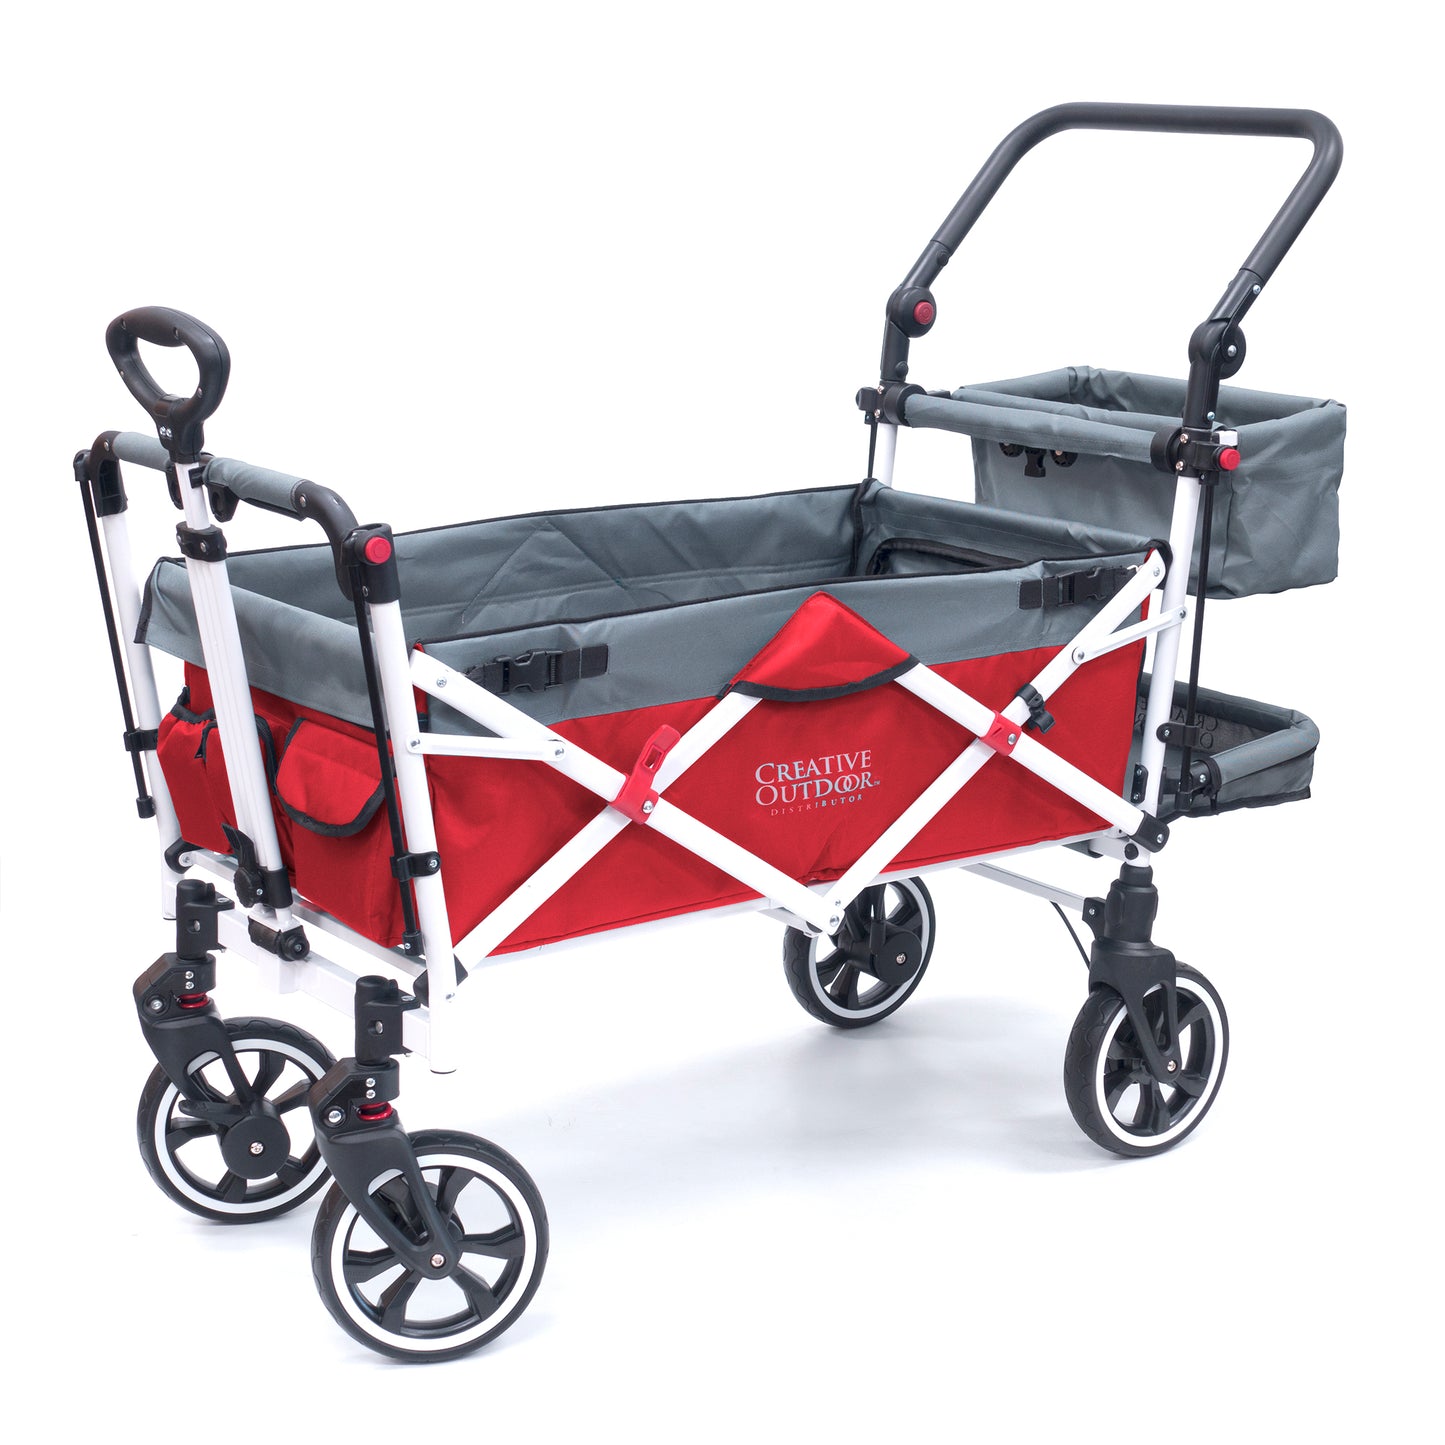 push-pull-titanium-series-plus-folding-wagon-stroller-with-canopy-red